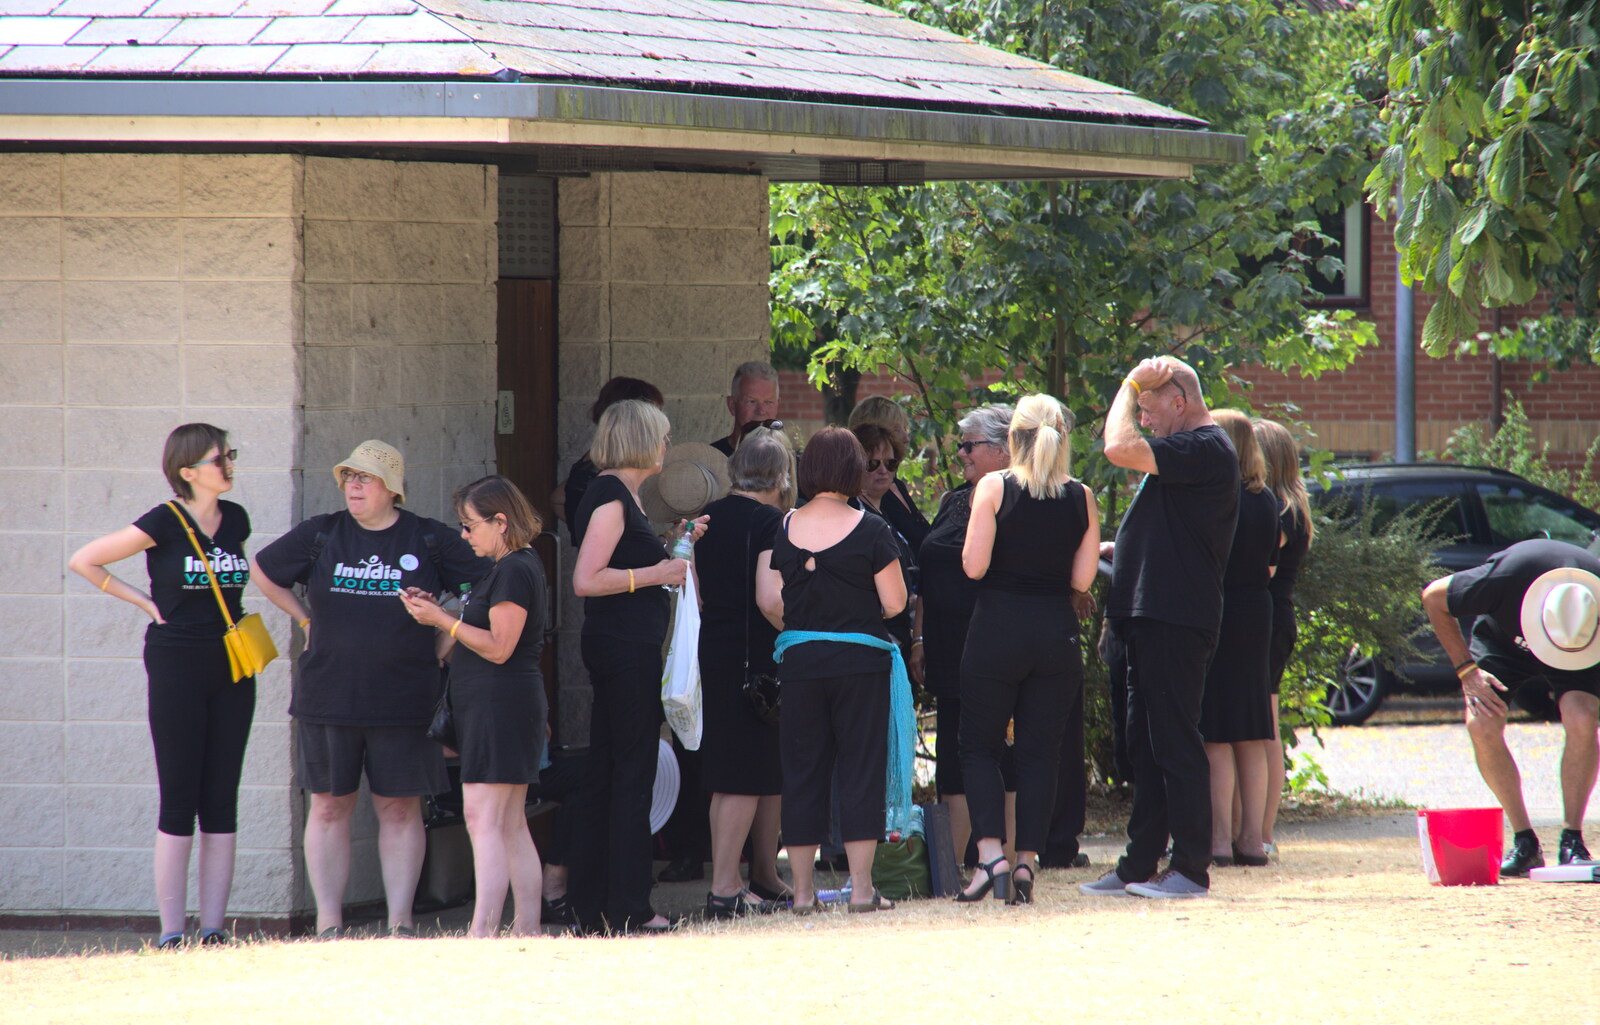 The choir shelters under the roof of the public bogs from Diss Fest, The Park, Diss, Norfolk - 22nd July 2018